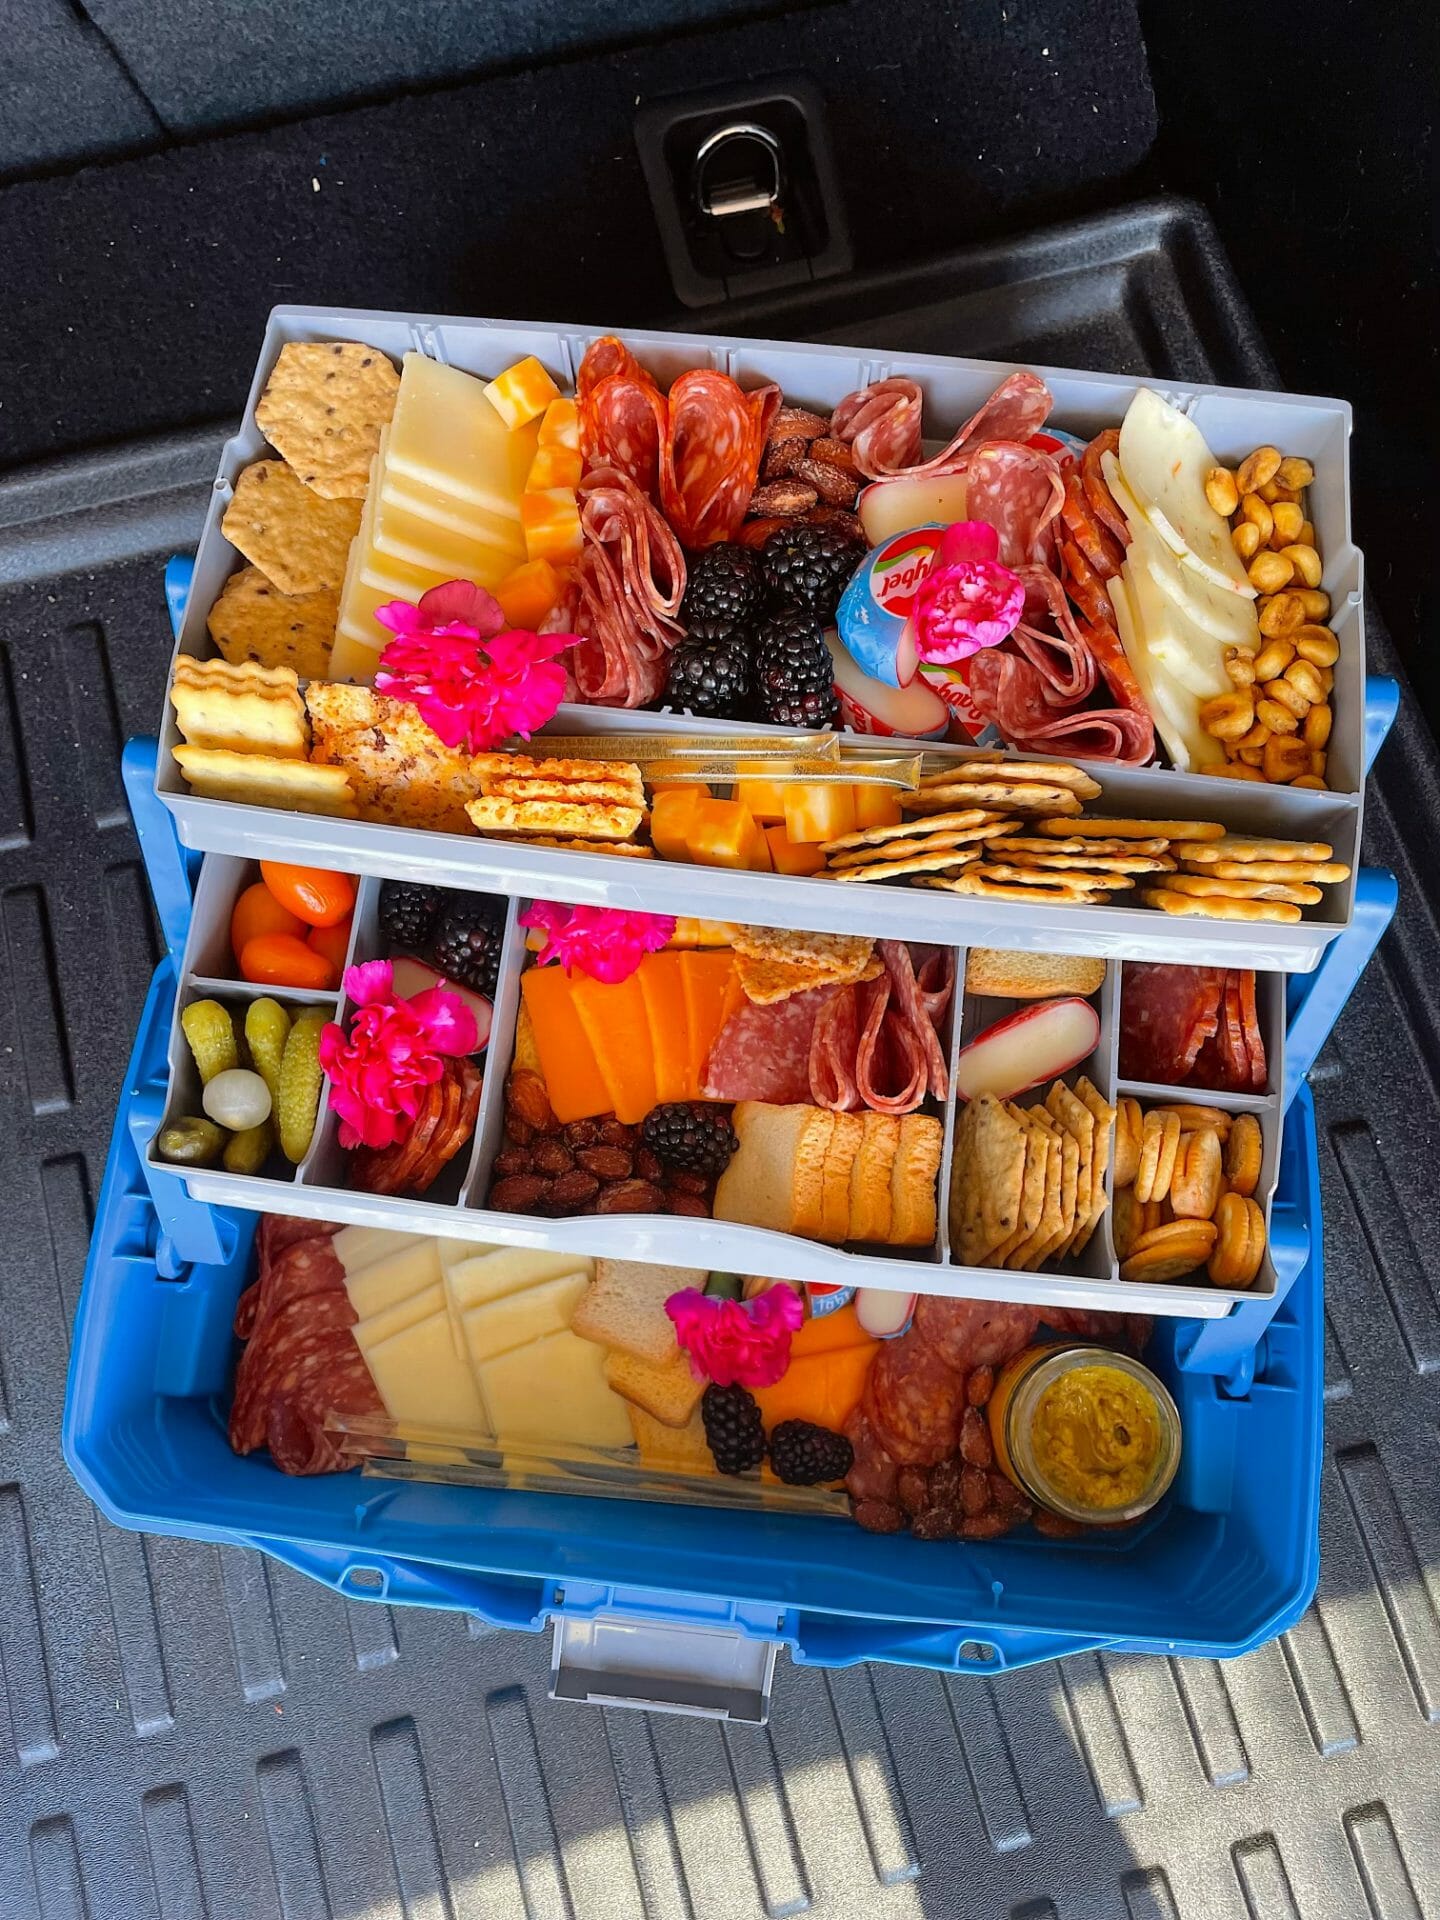 Snacks in a tackle box - Just for fun